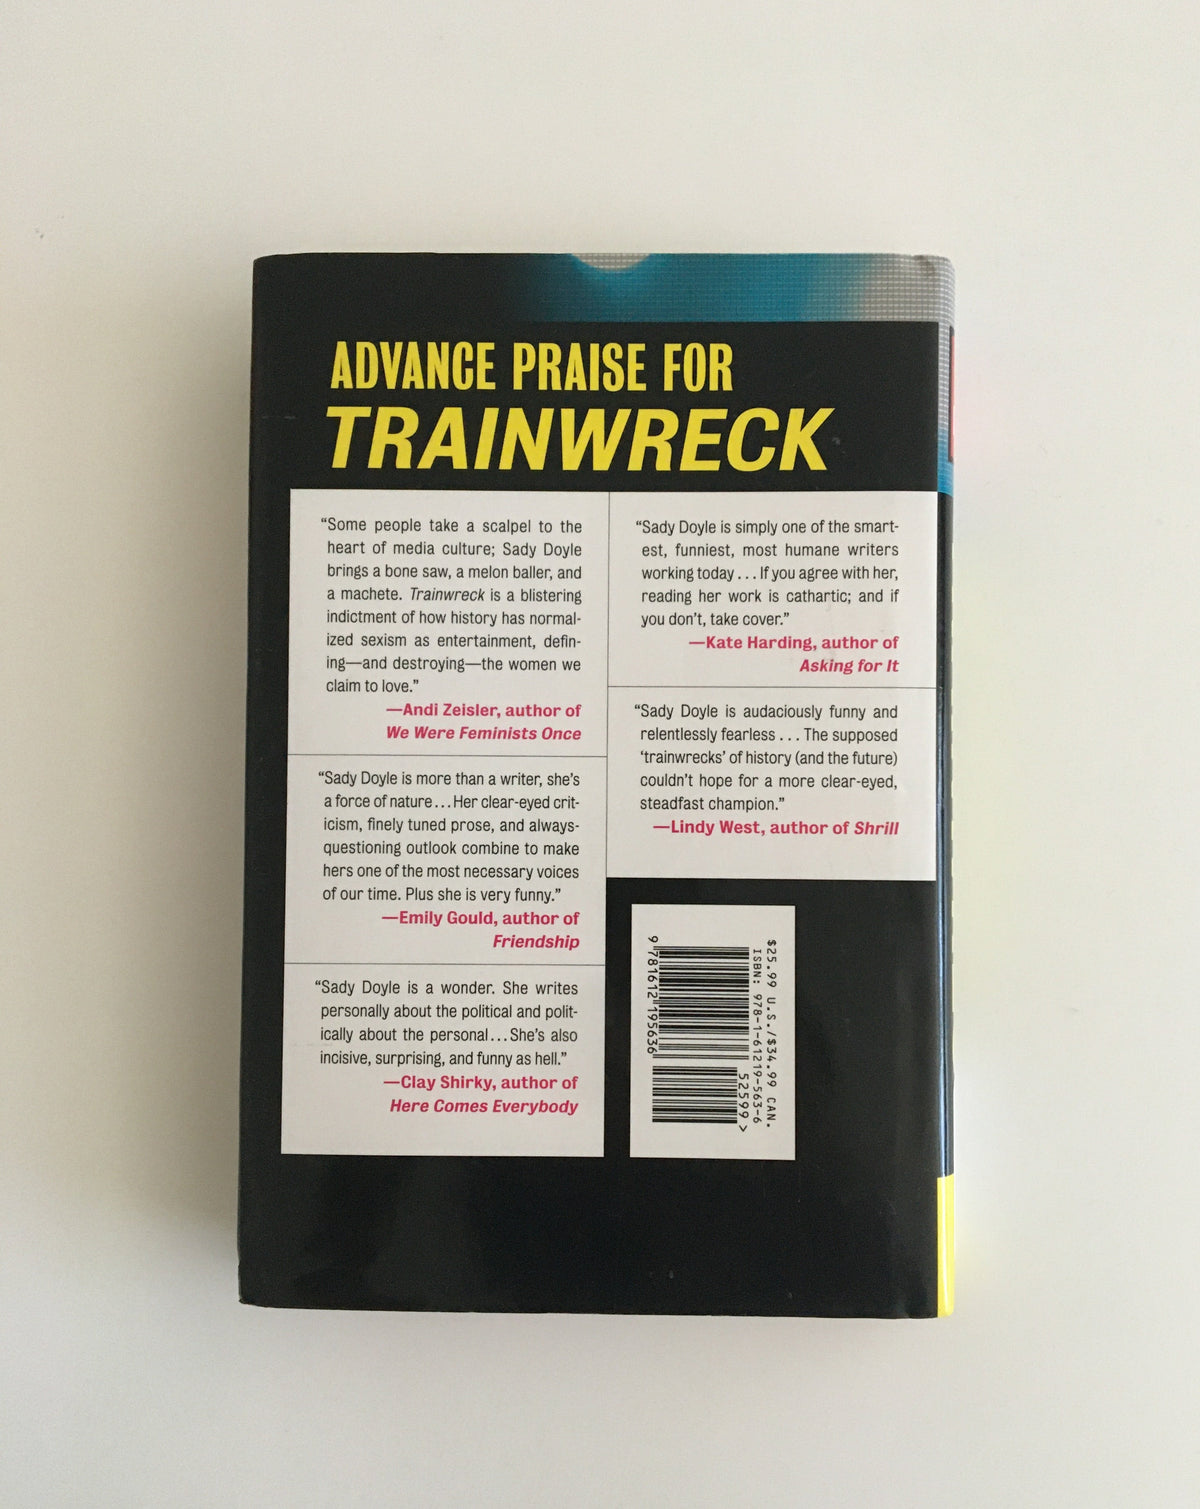 Trainwreck: The Women We Love to Hate, Mock, and Fear... and Why by Sandy Doyle